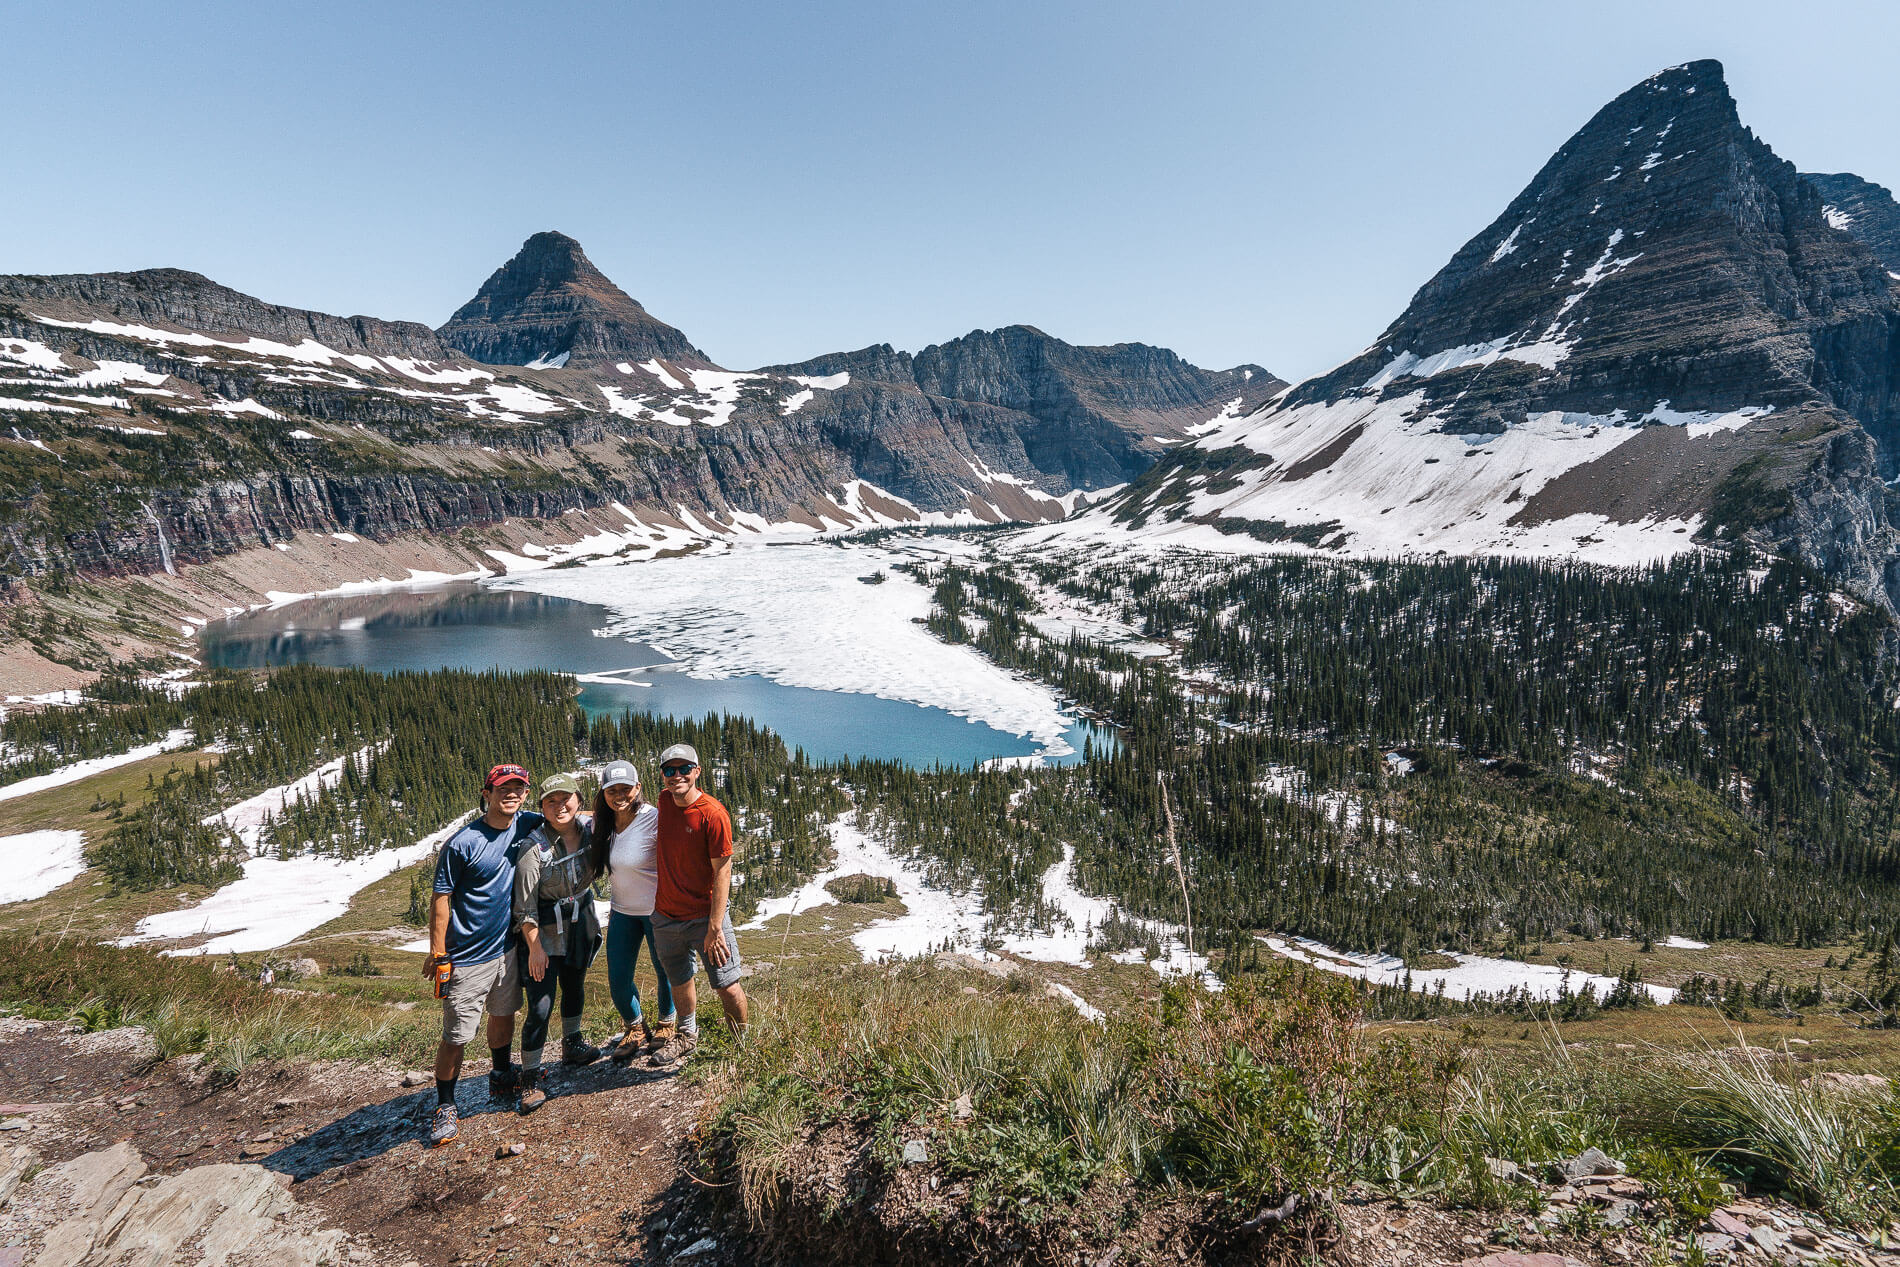 Our Glacier National Park Week Itinerary